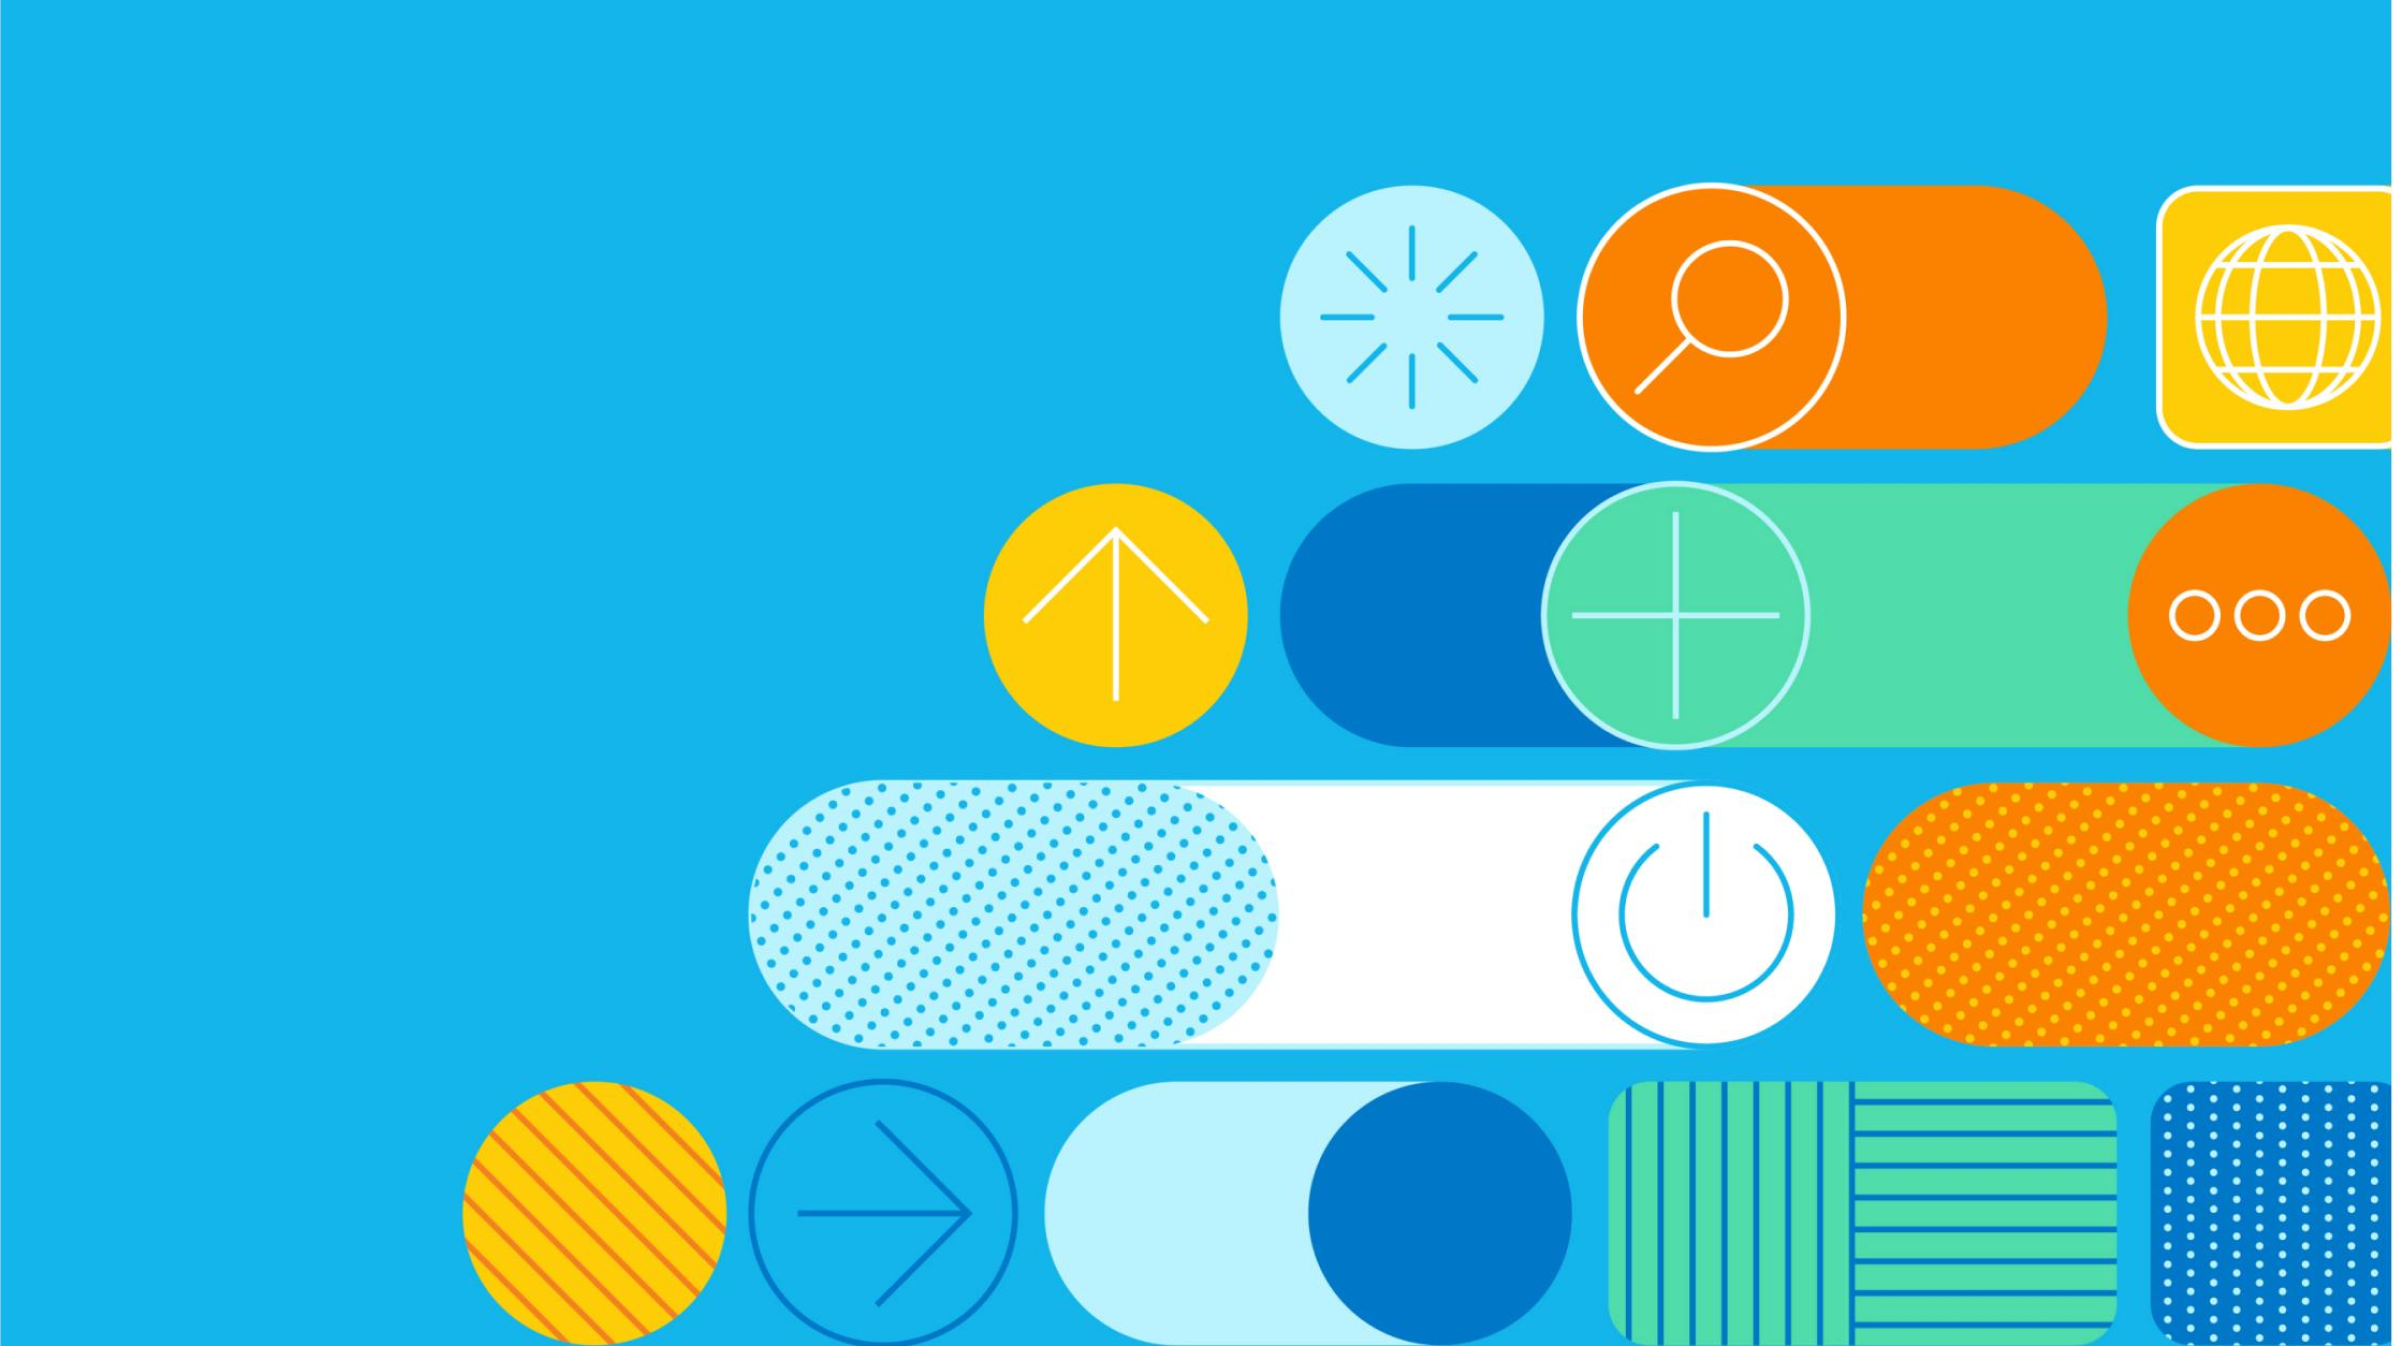 Colorful circles and shape against a blue background.